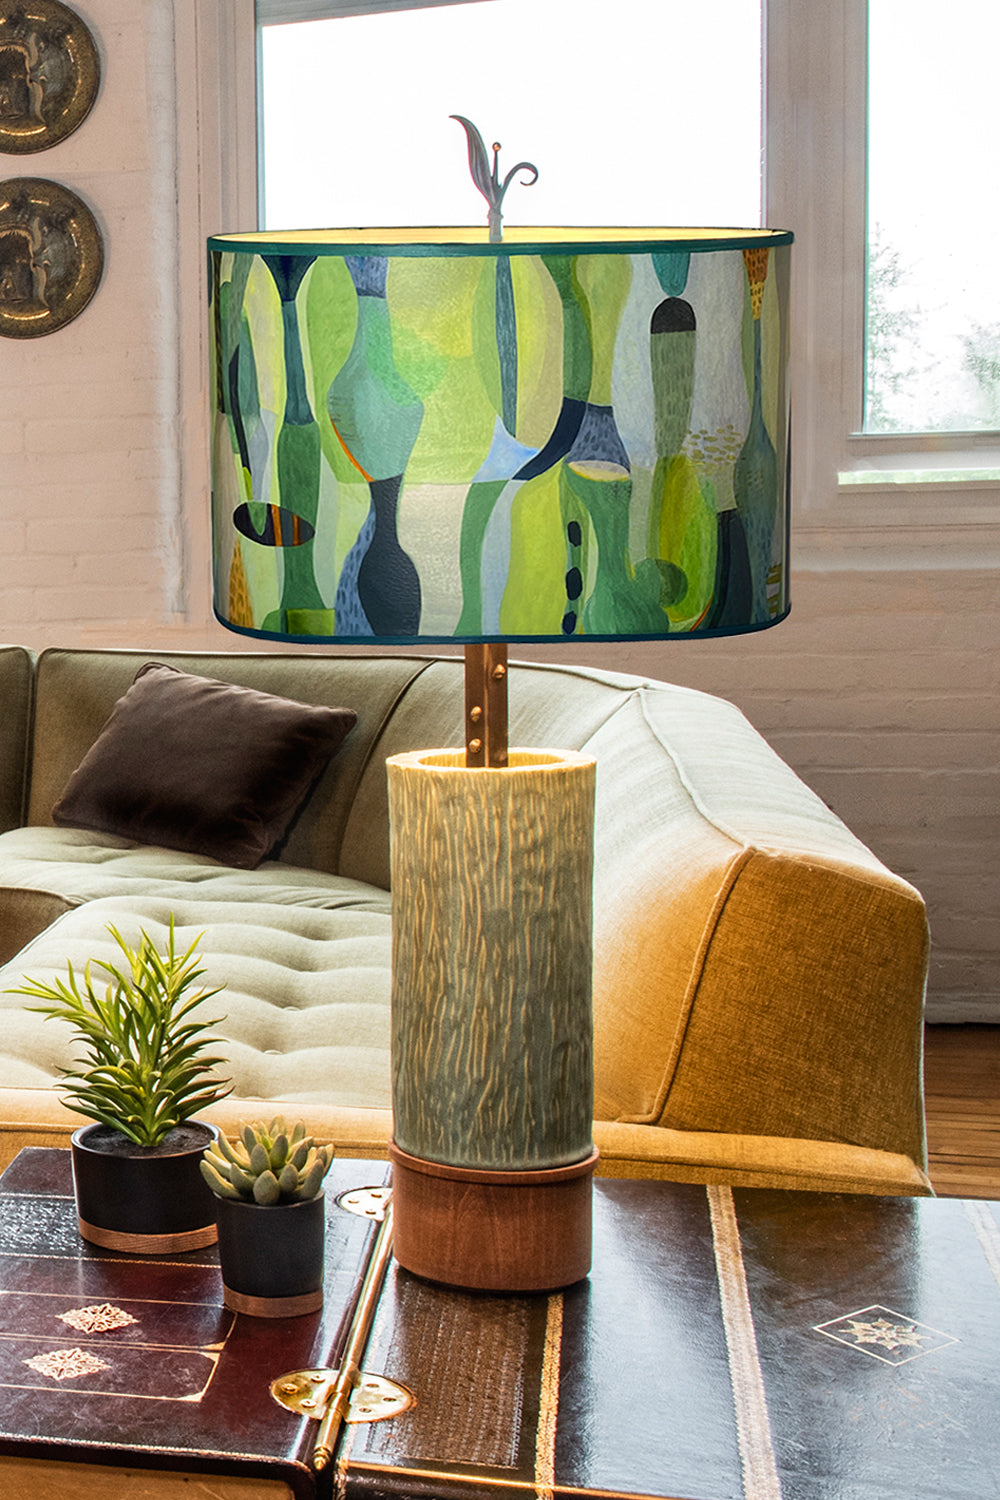 Janna Ugone & Co Table Lamp Ceramic and Wood Table Lamp with Large Drum Shade in Riviera in Citrus